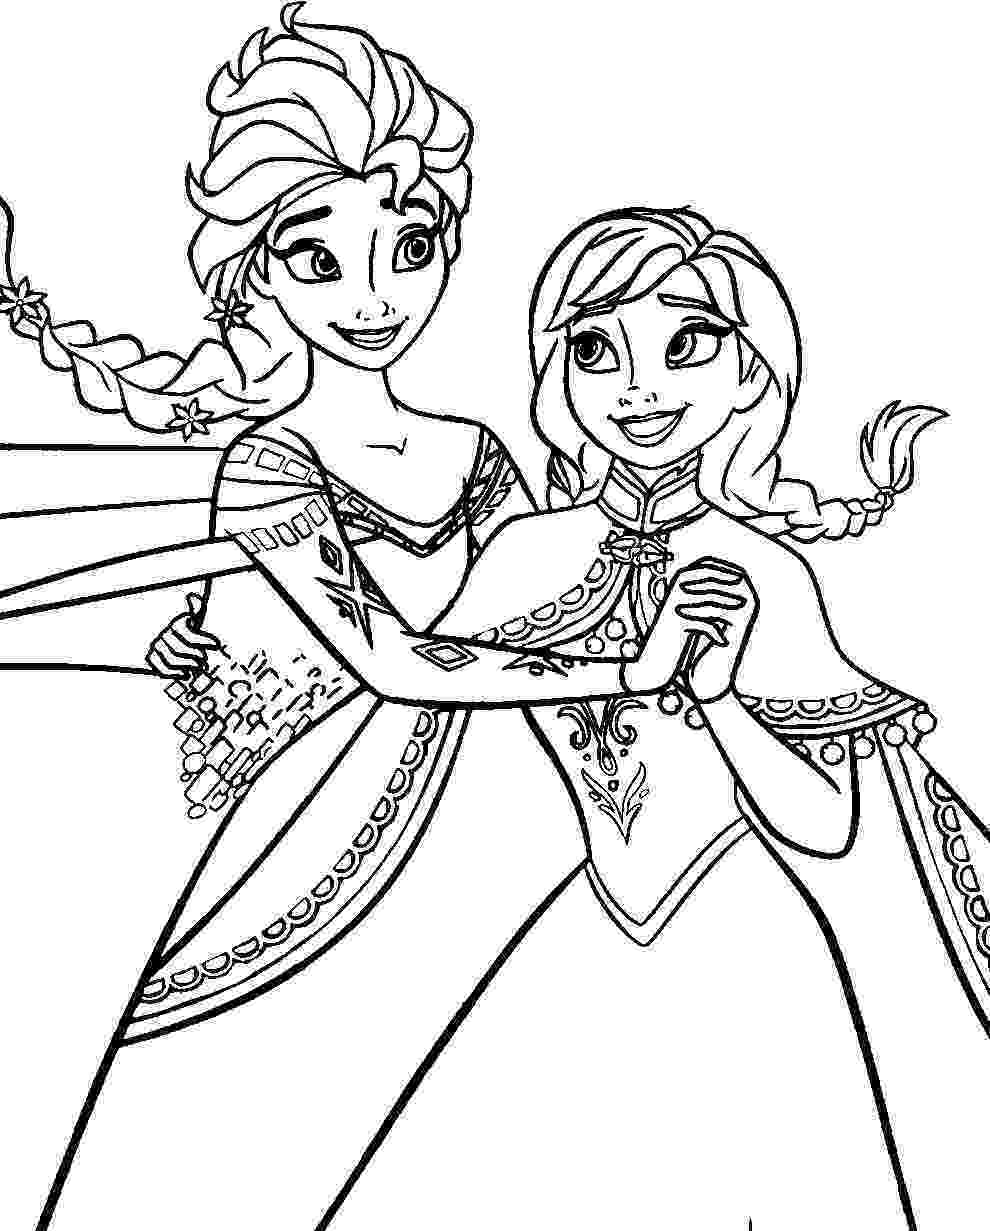 frozen coloring pages free 15 beautiful disney frozen coloring pages free instant pages frozen coloring free 